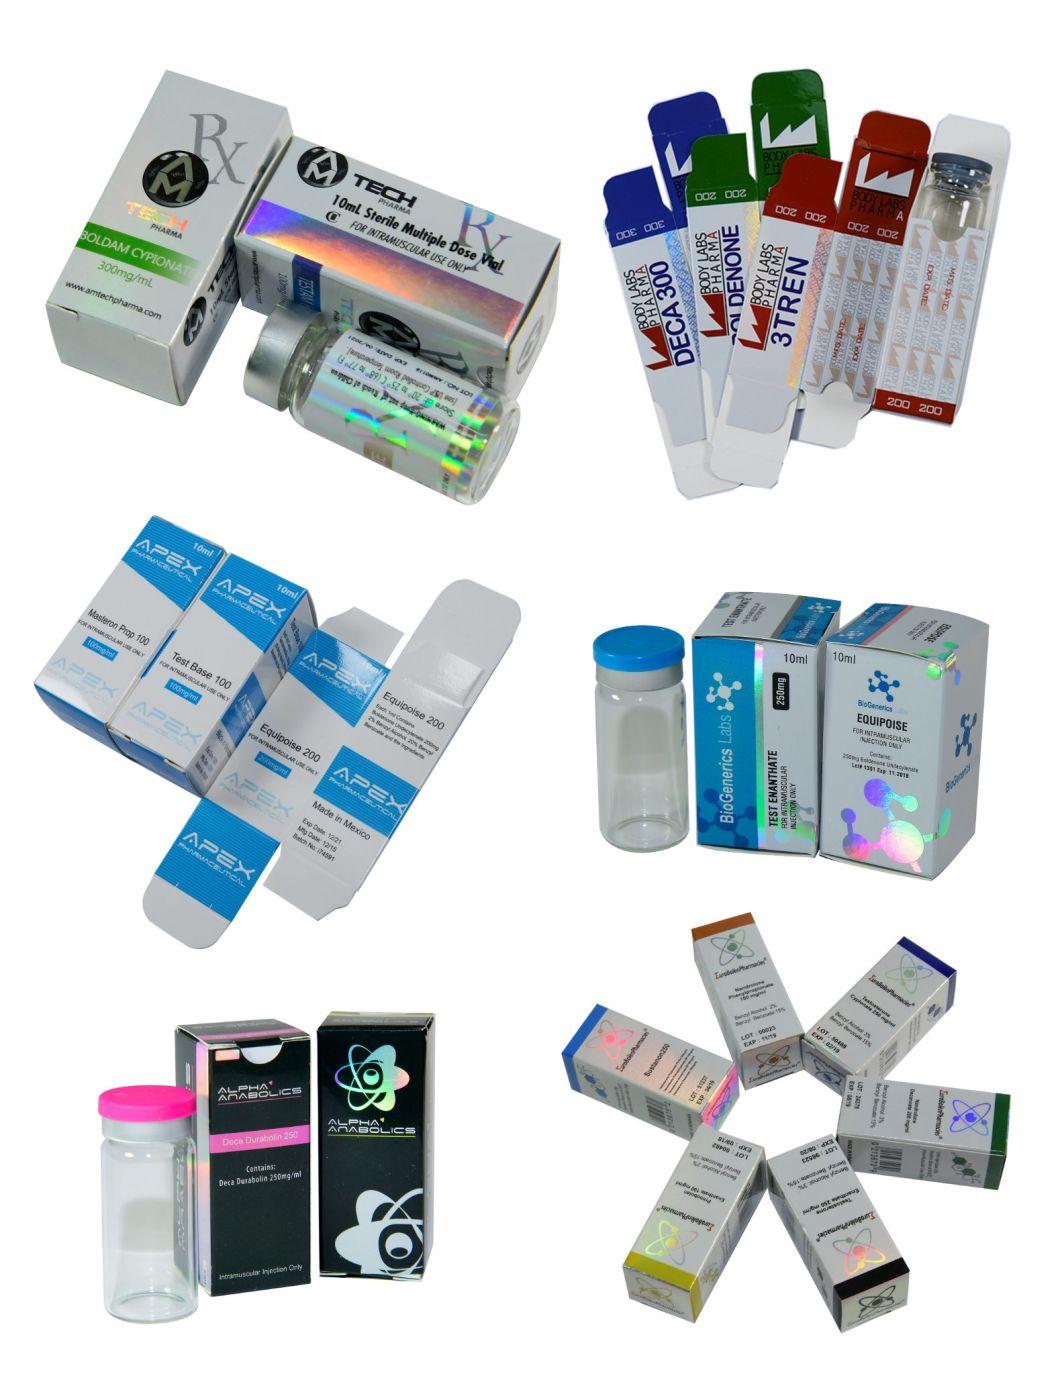 Free Design OEM 10ml Vial Label Box for Steroid Packaging